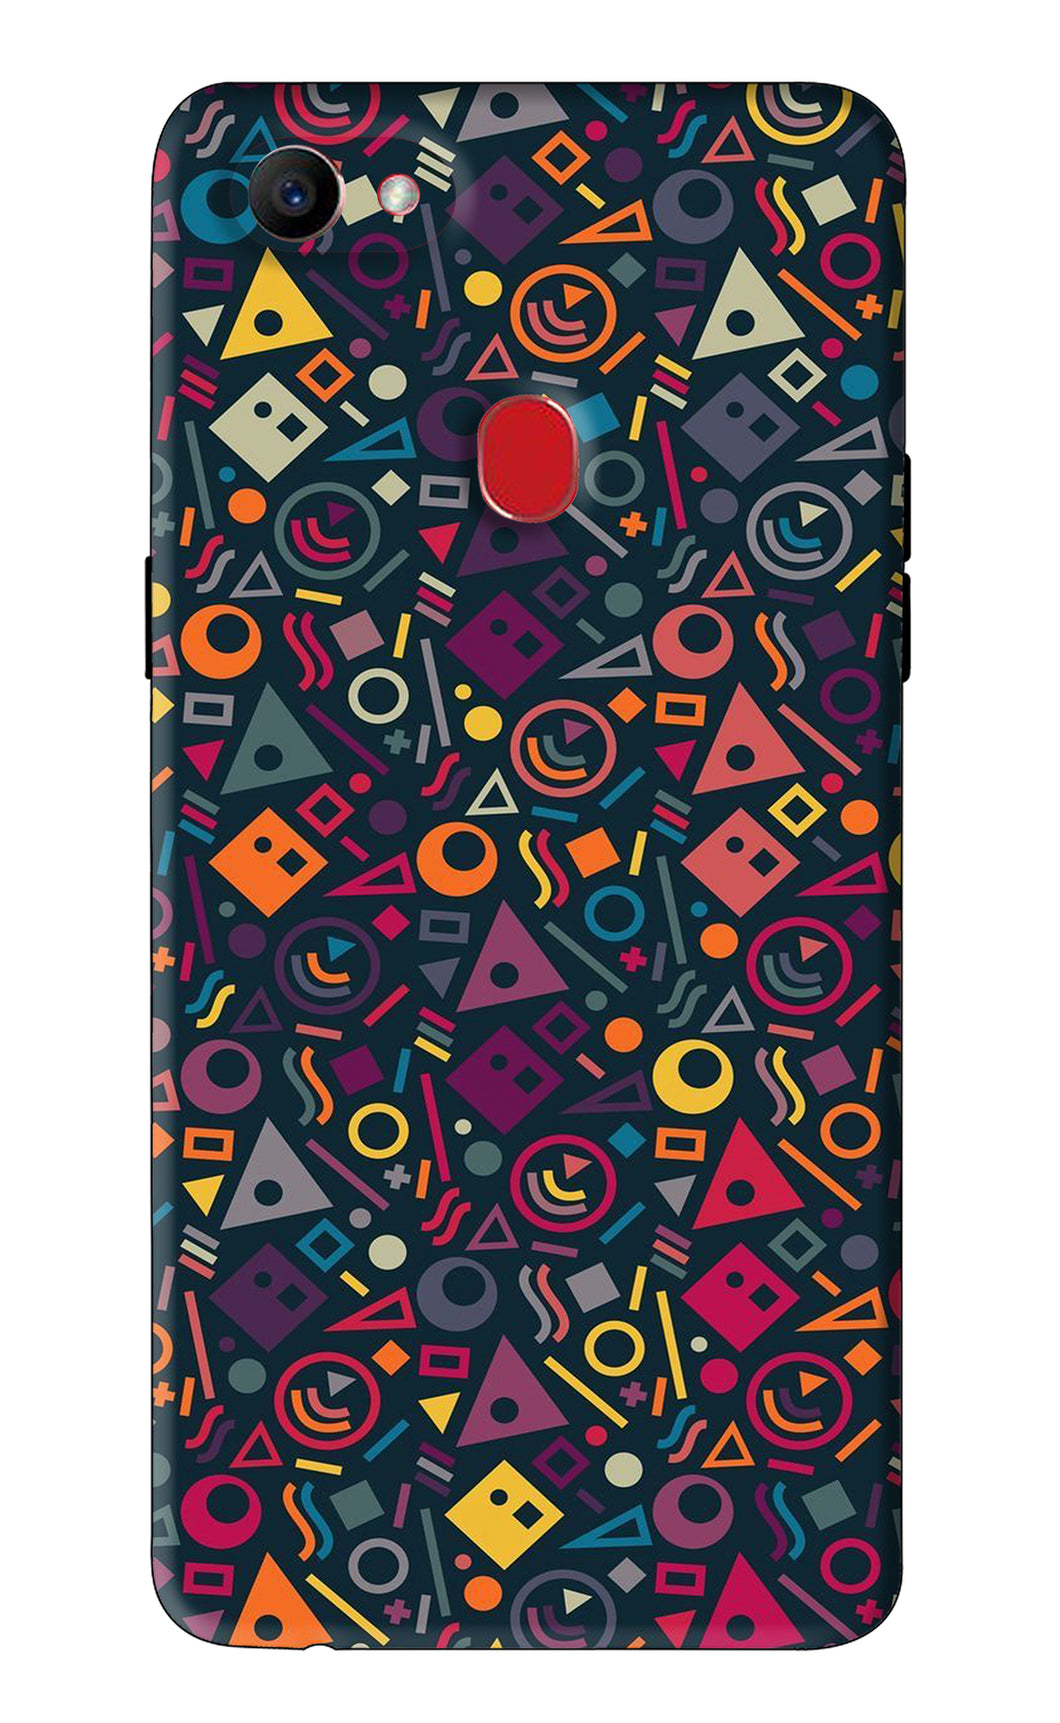 Geometric Abstract Oppo F7 Back Skin Wrap